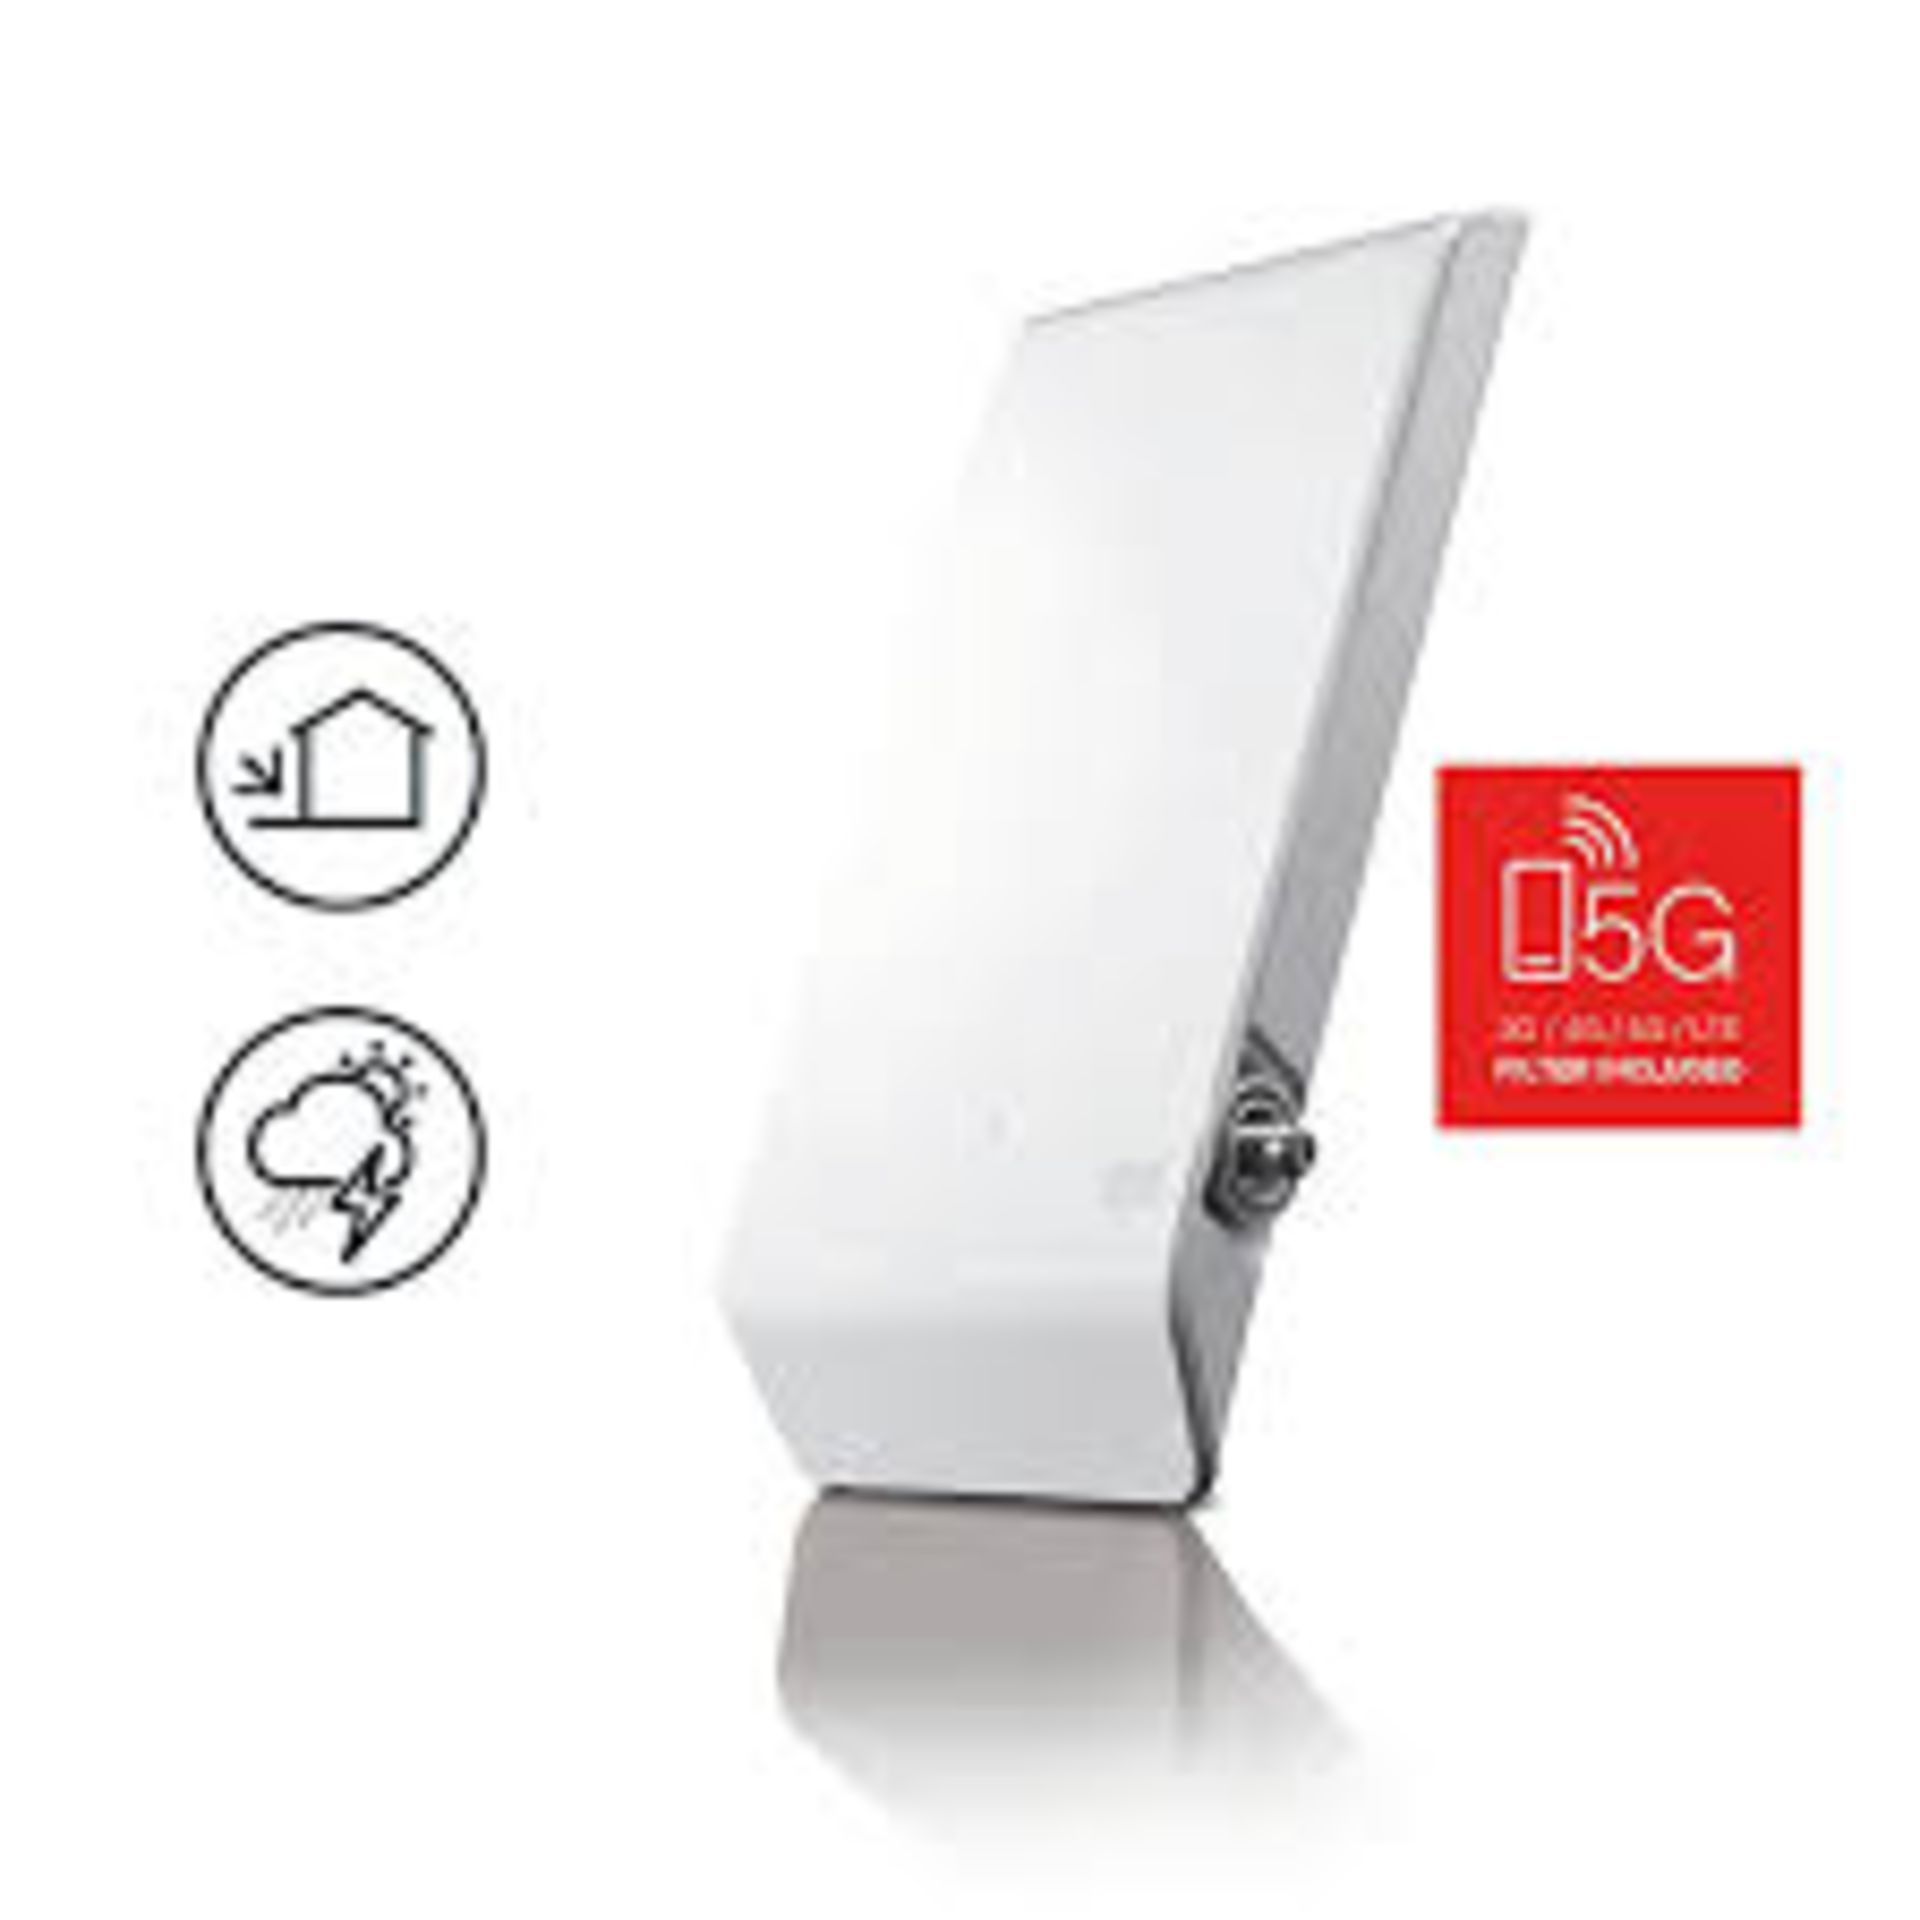 One For All Outdoor Digital TV aerial SV9450. - S2.13. Enhance your Digital TV reception with this